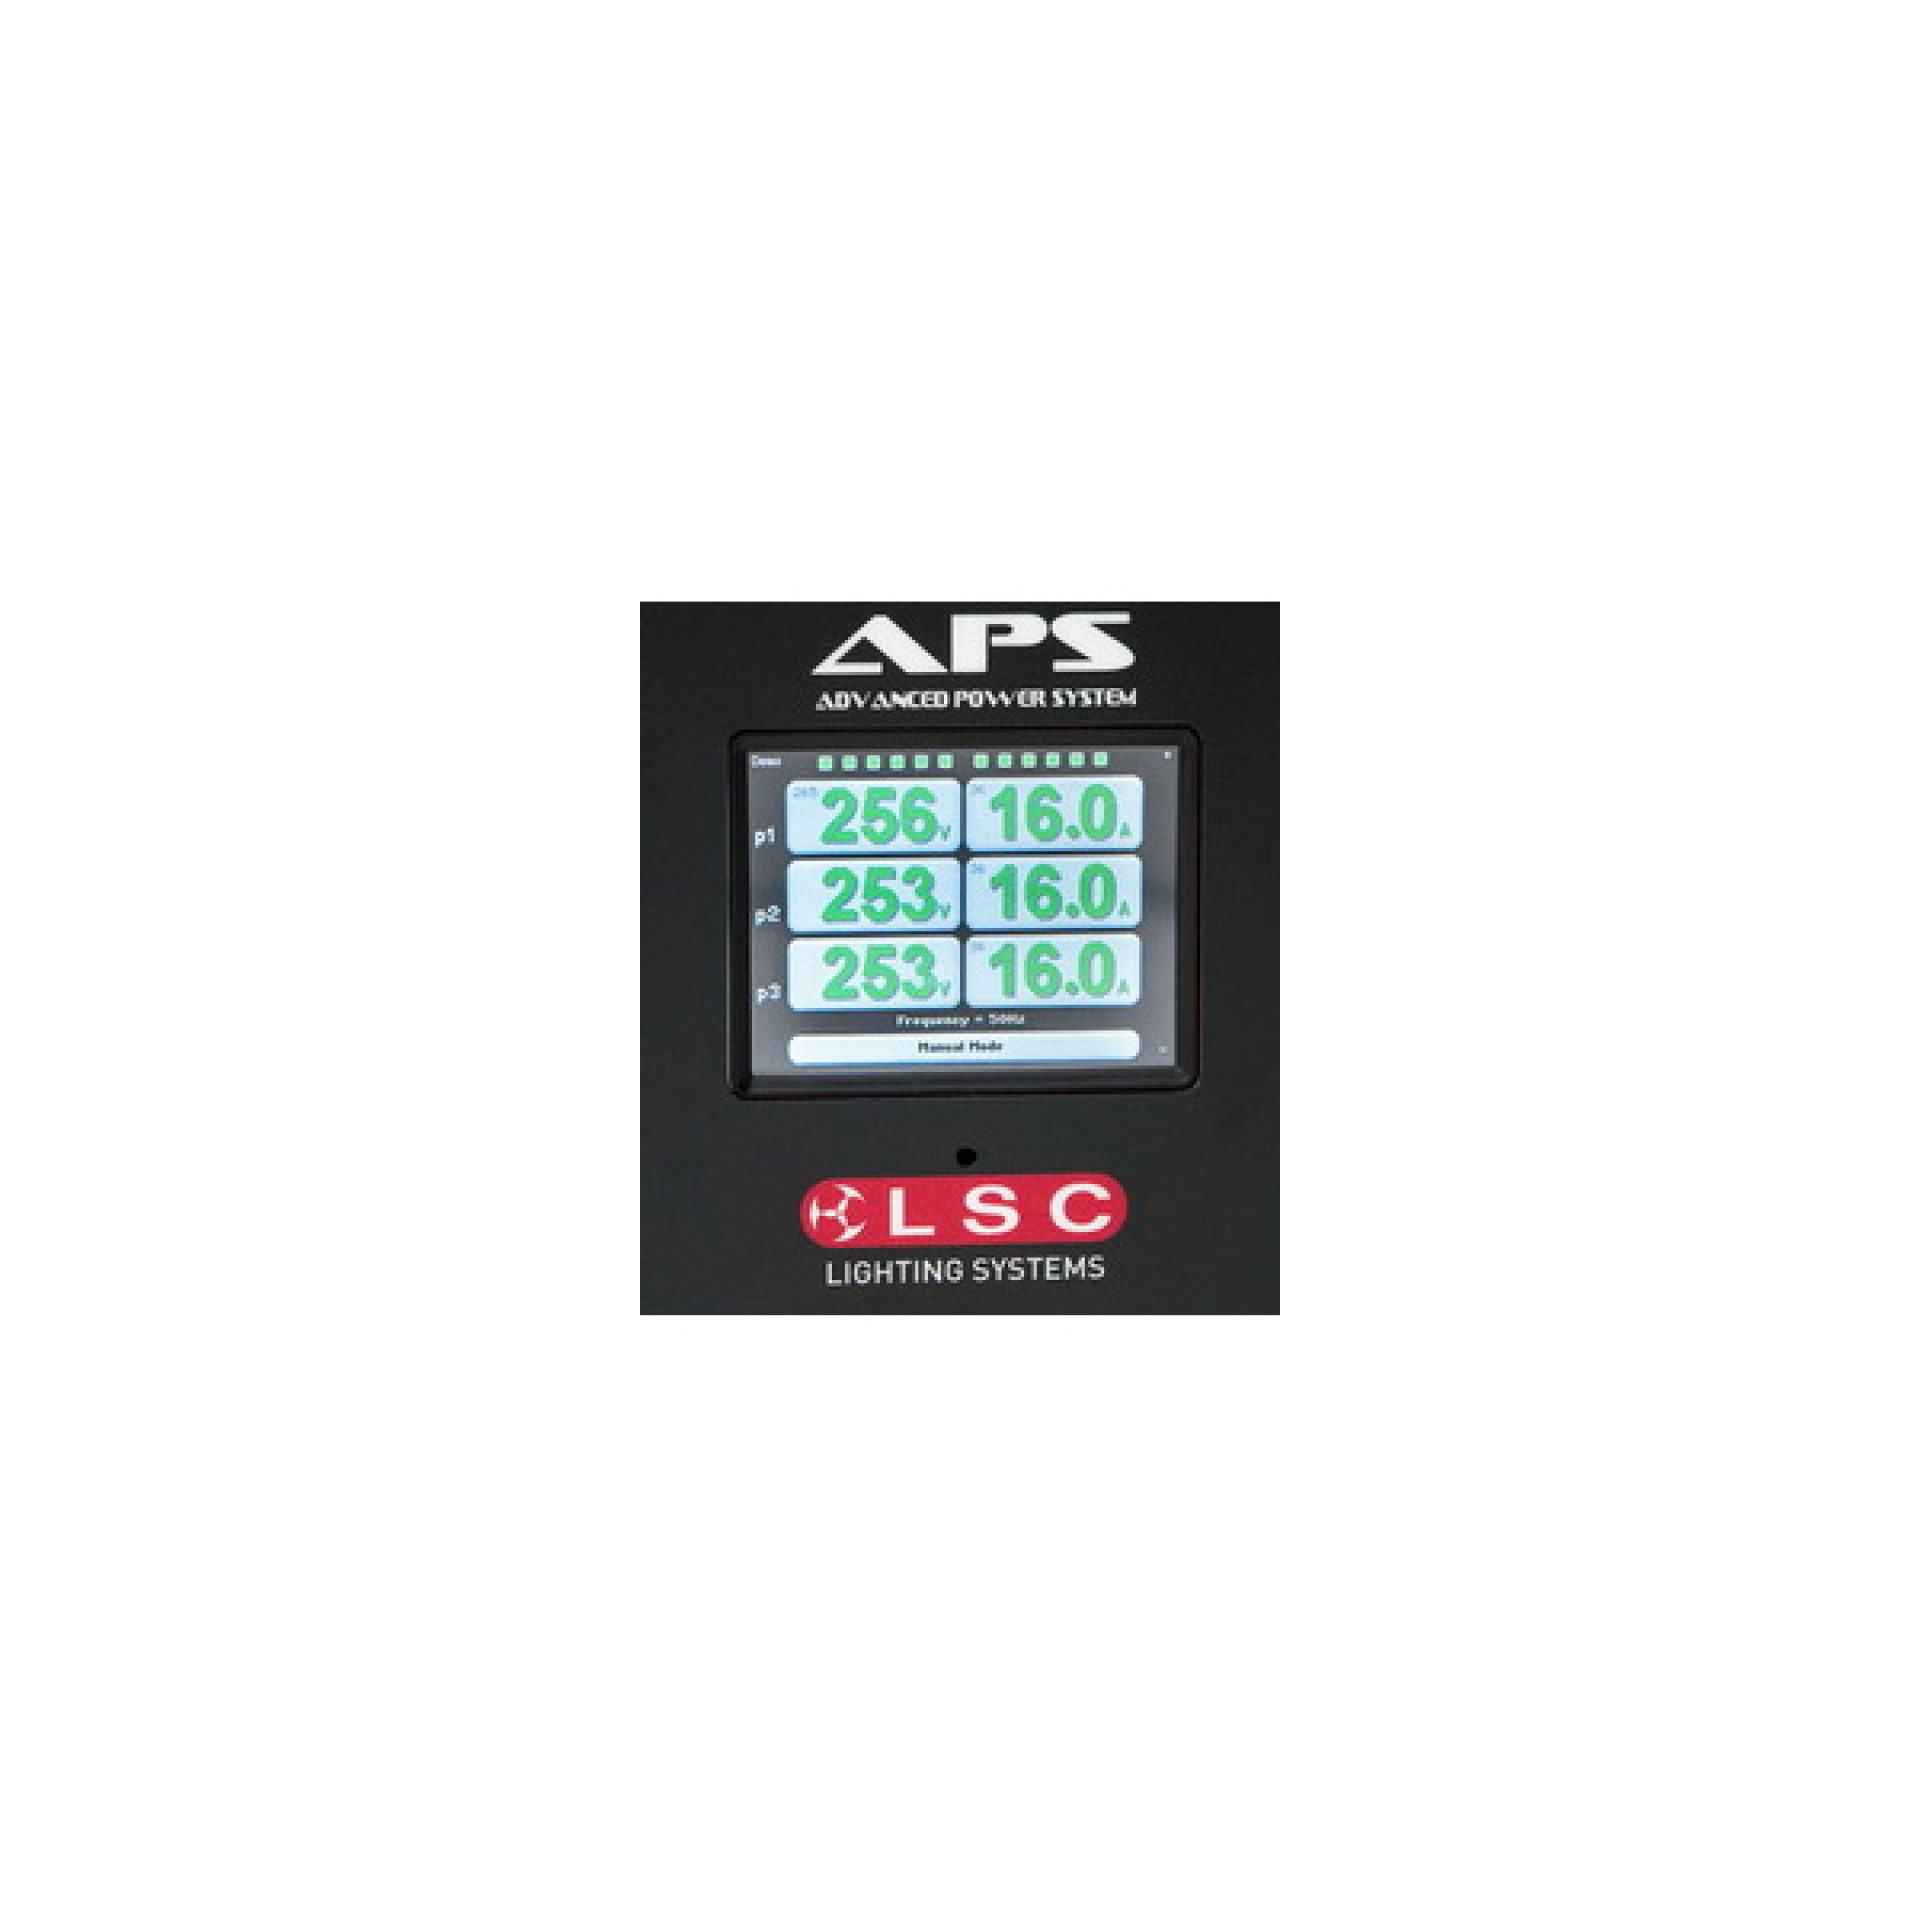 LSC Control Systems APS display close-up